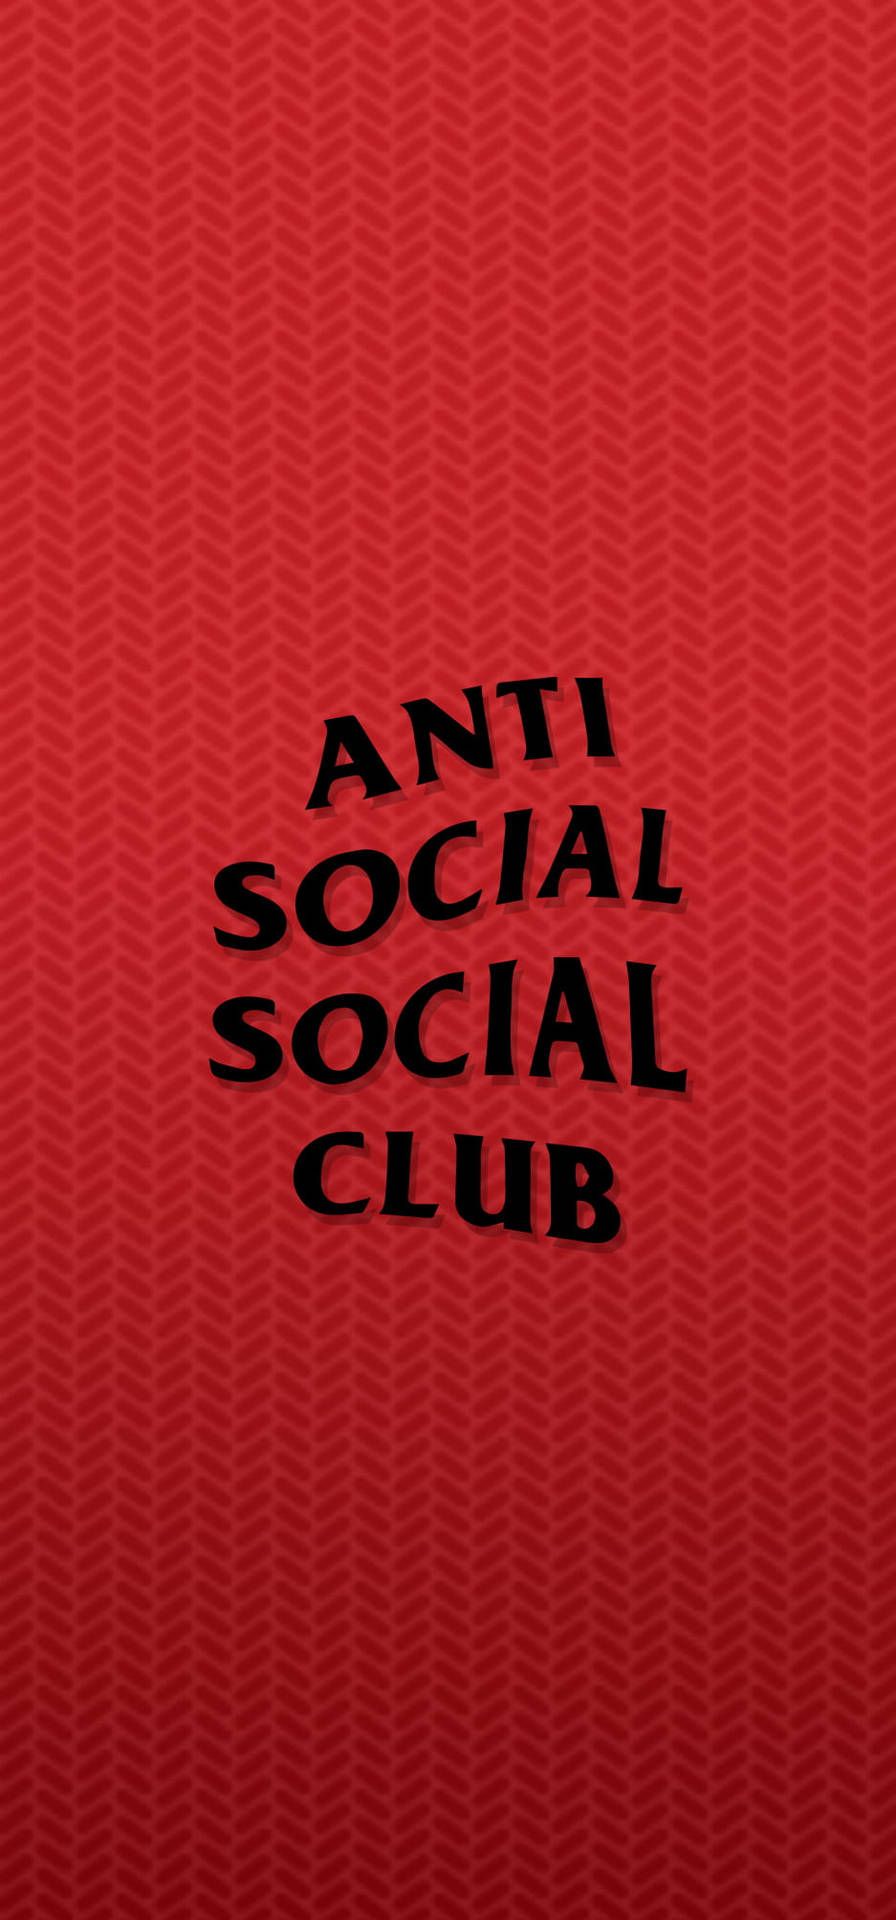 Anti Social Social Club iPhone Wallpaper with high-resolution 1080x1920 pixel. You can use this wallpaper for your iPhone 5, 6, 7, 8, X, XS, XR backgrounds, Mobile Screensaver, or iPad Lock Screen - Anti Social Social Club